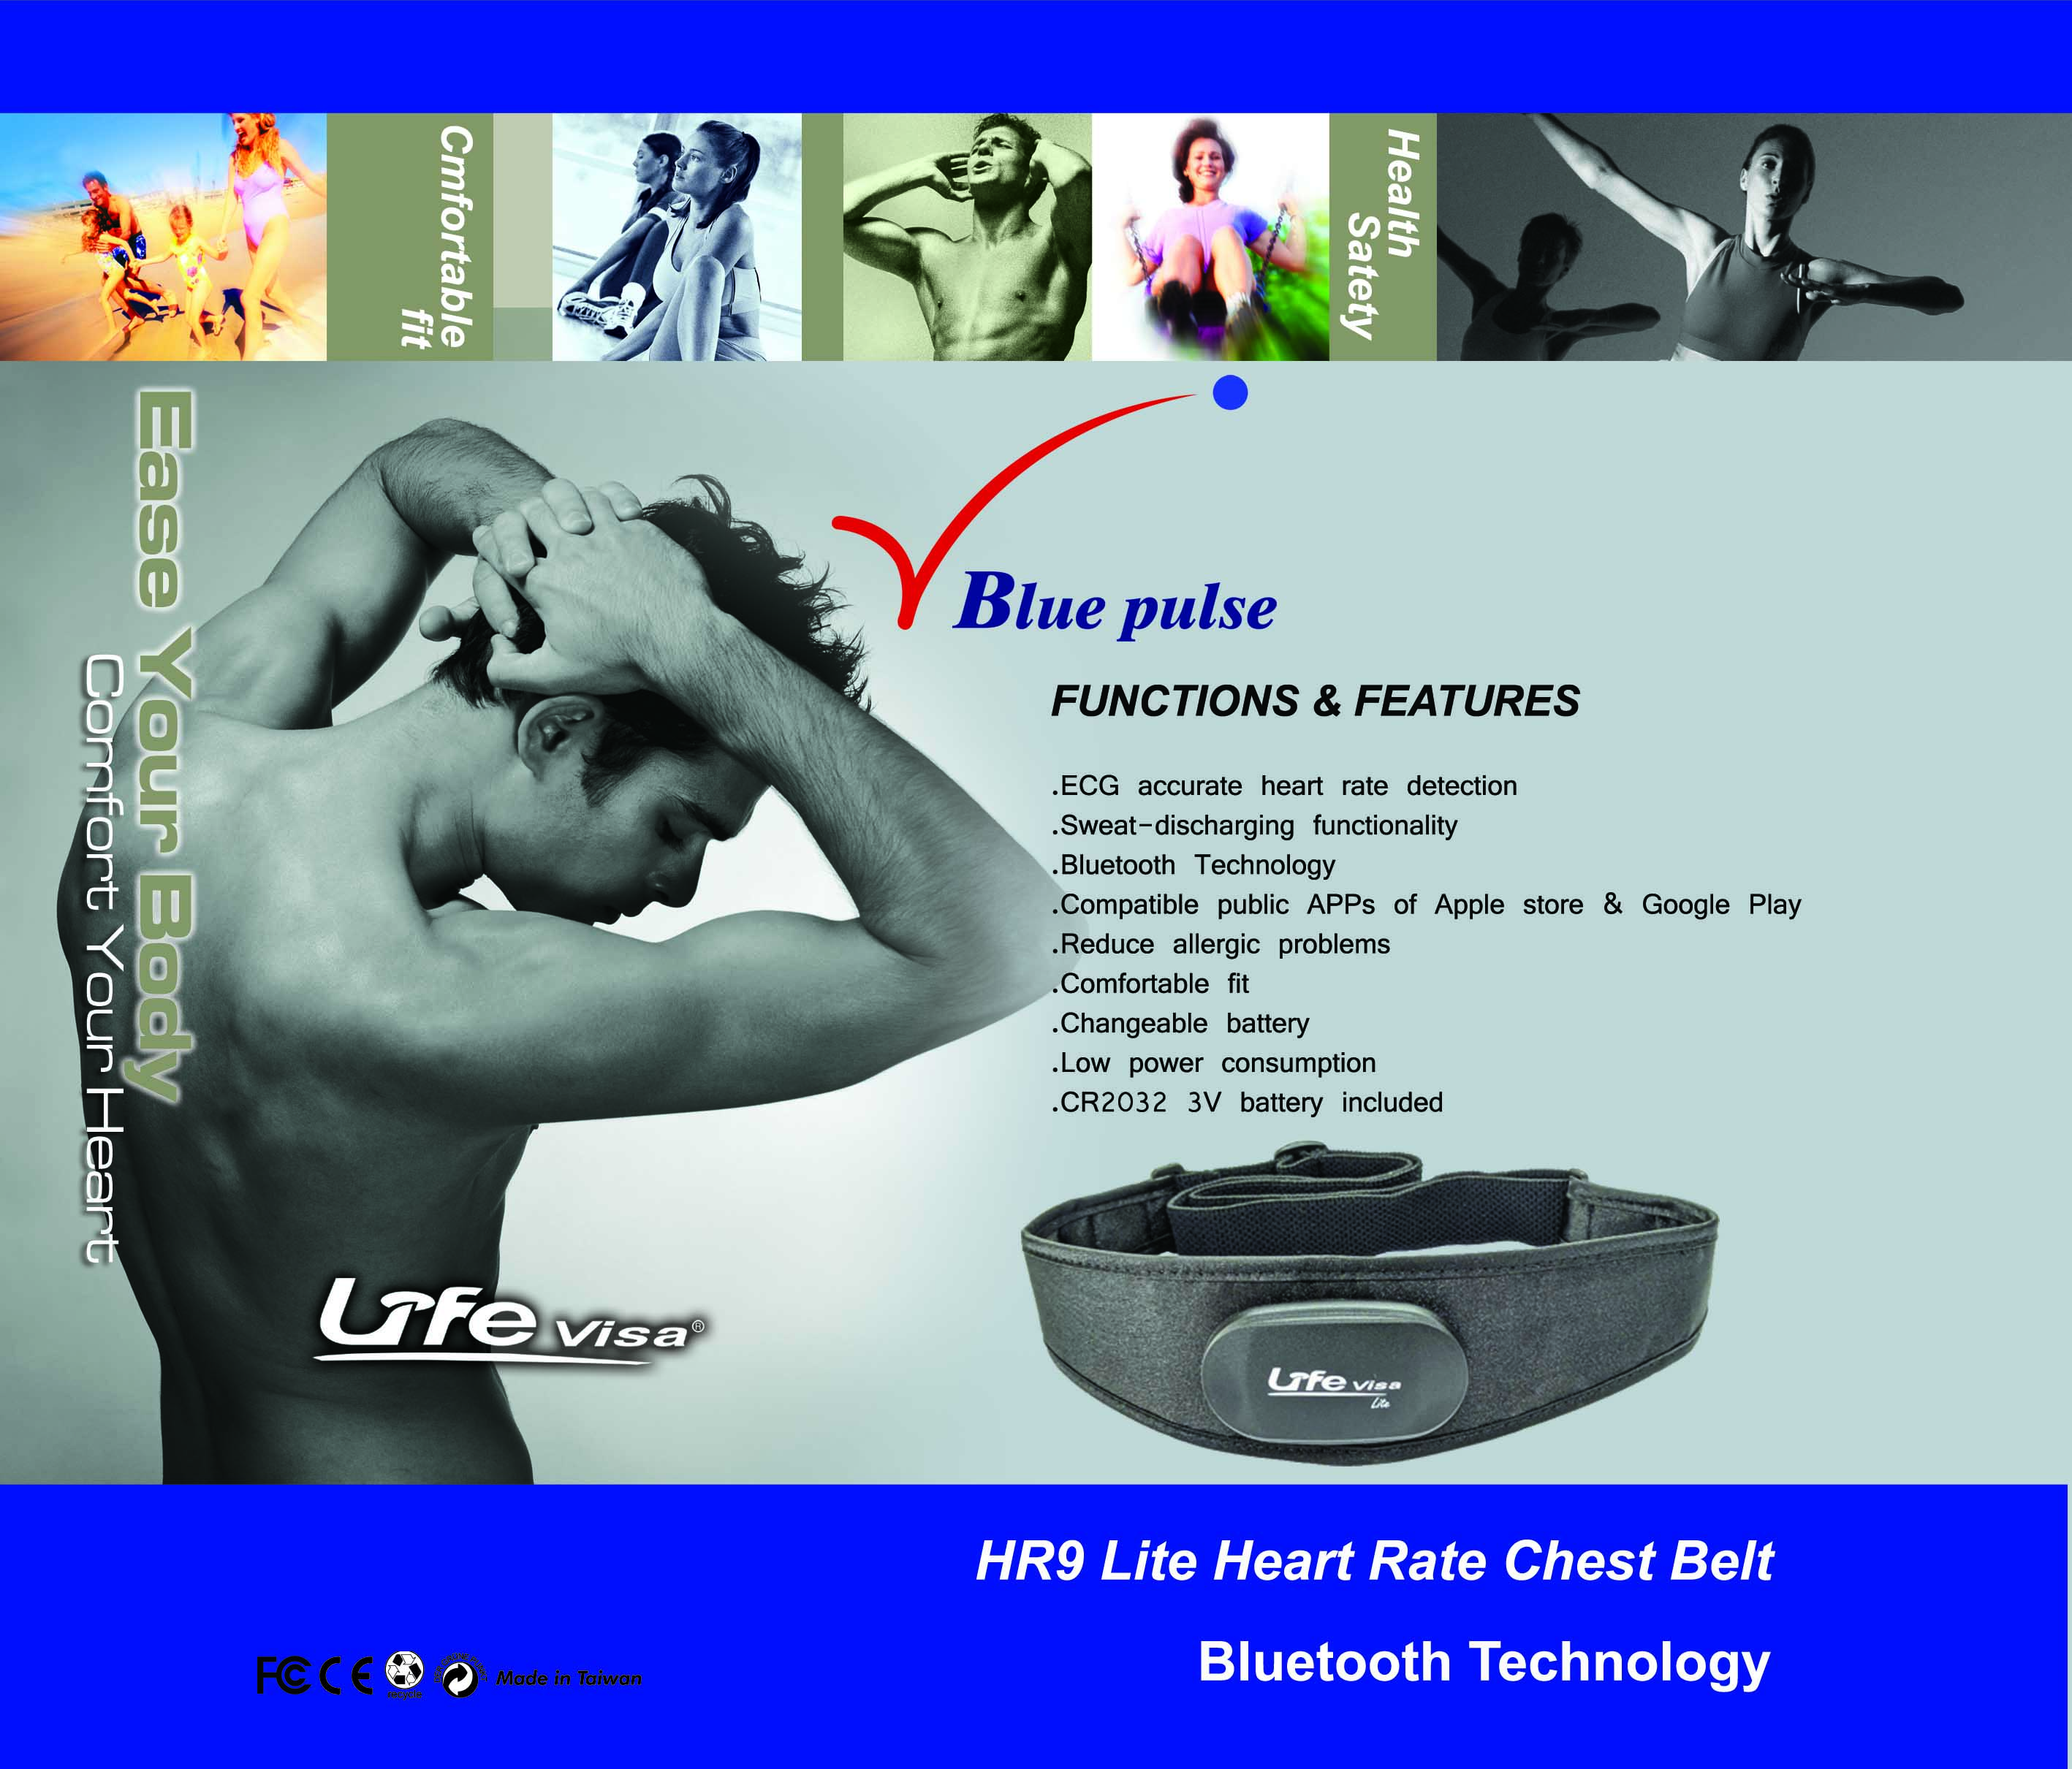 Bluetooth heart rate monitor,heart rate monitor,Biotronic pulse heart rate monitor, heart rate monitor,G.PULSE 3 in 1,3 in 1 heart rate,three mode heart rate monitor,Lifevisa,lifevisa,Taiwan Biotronic